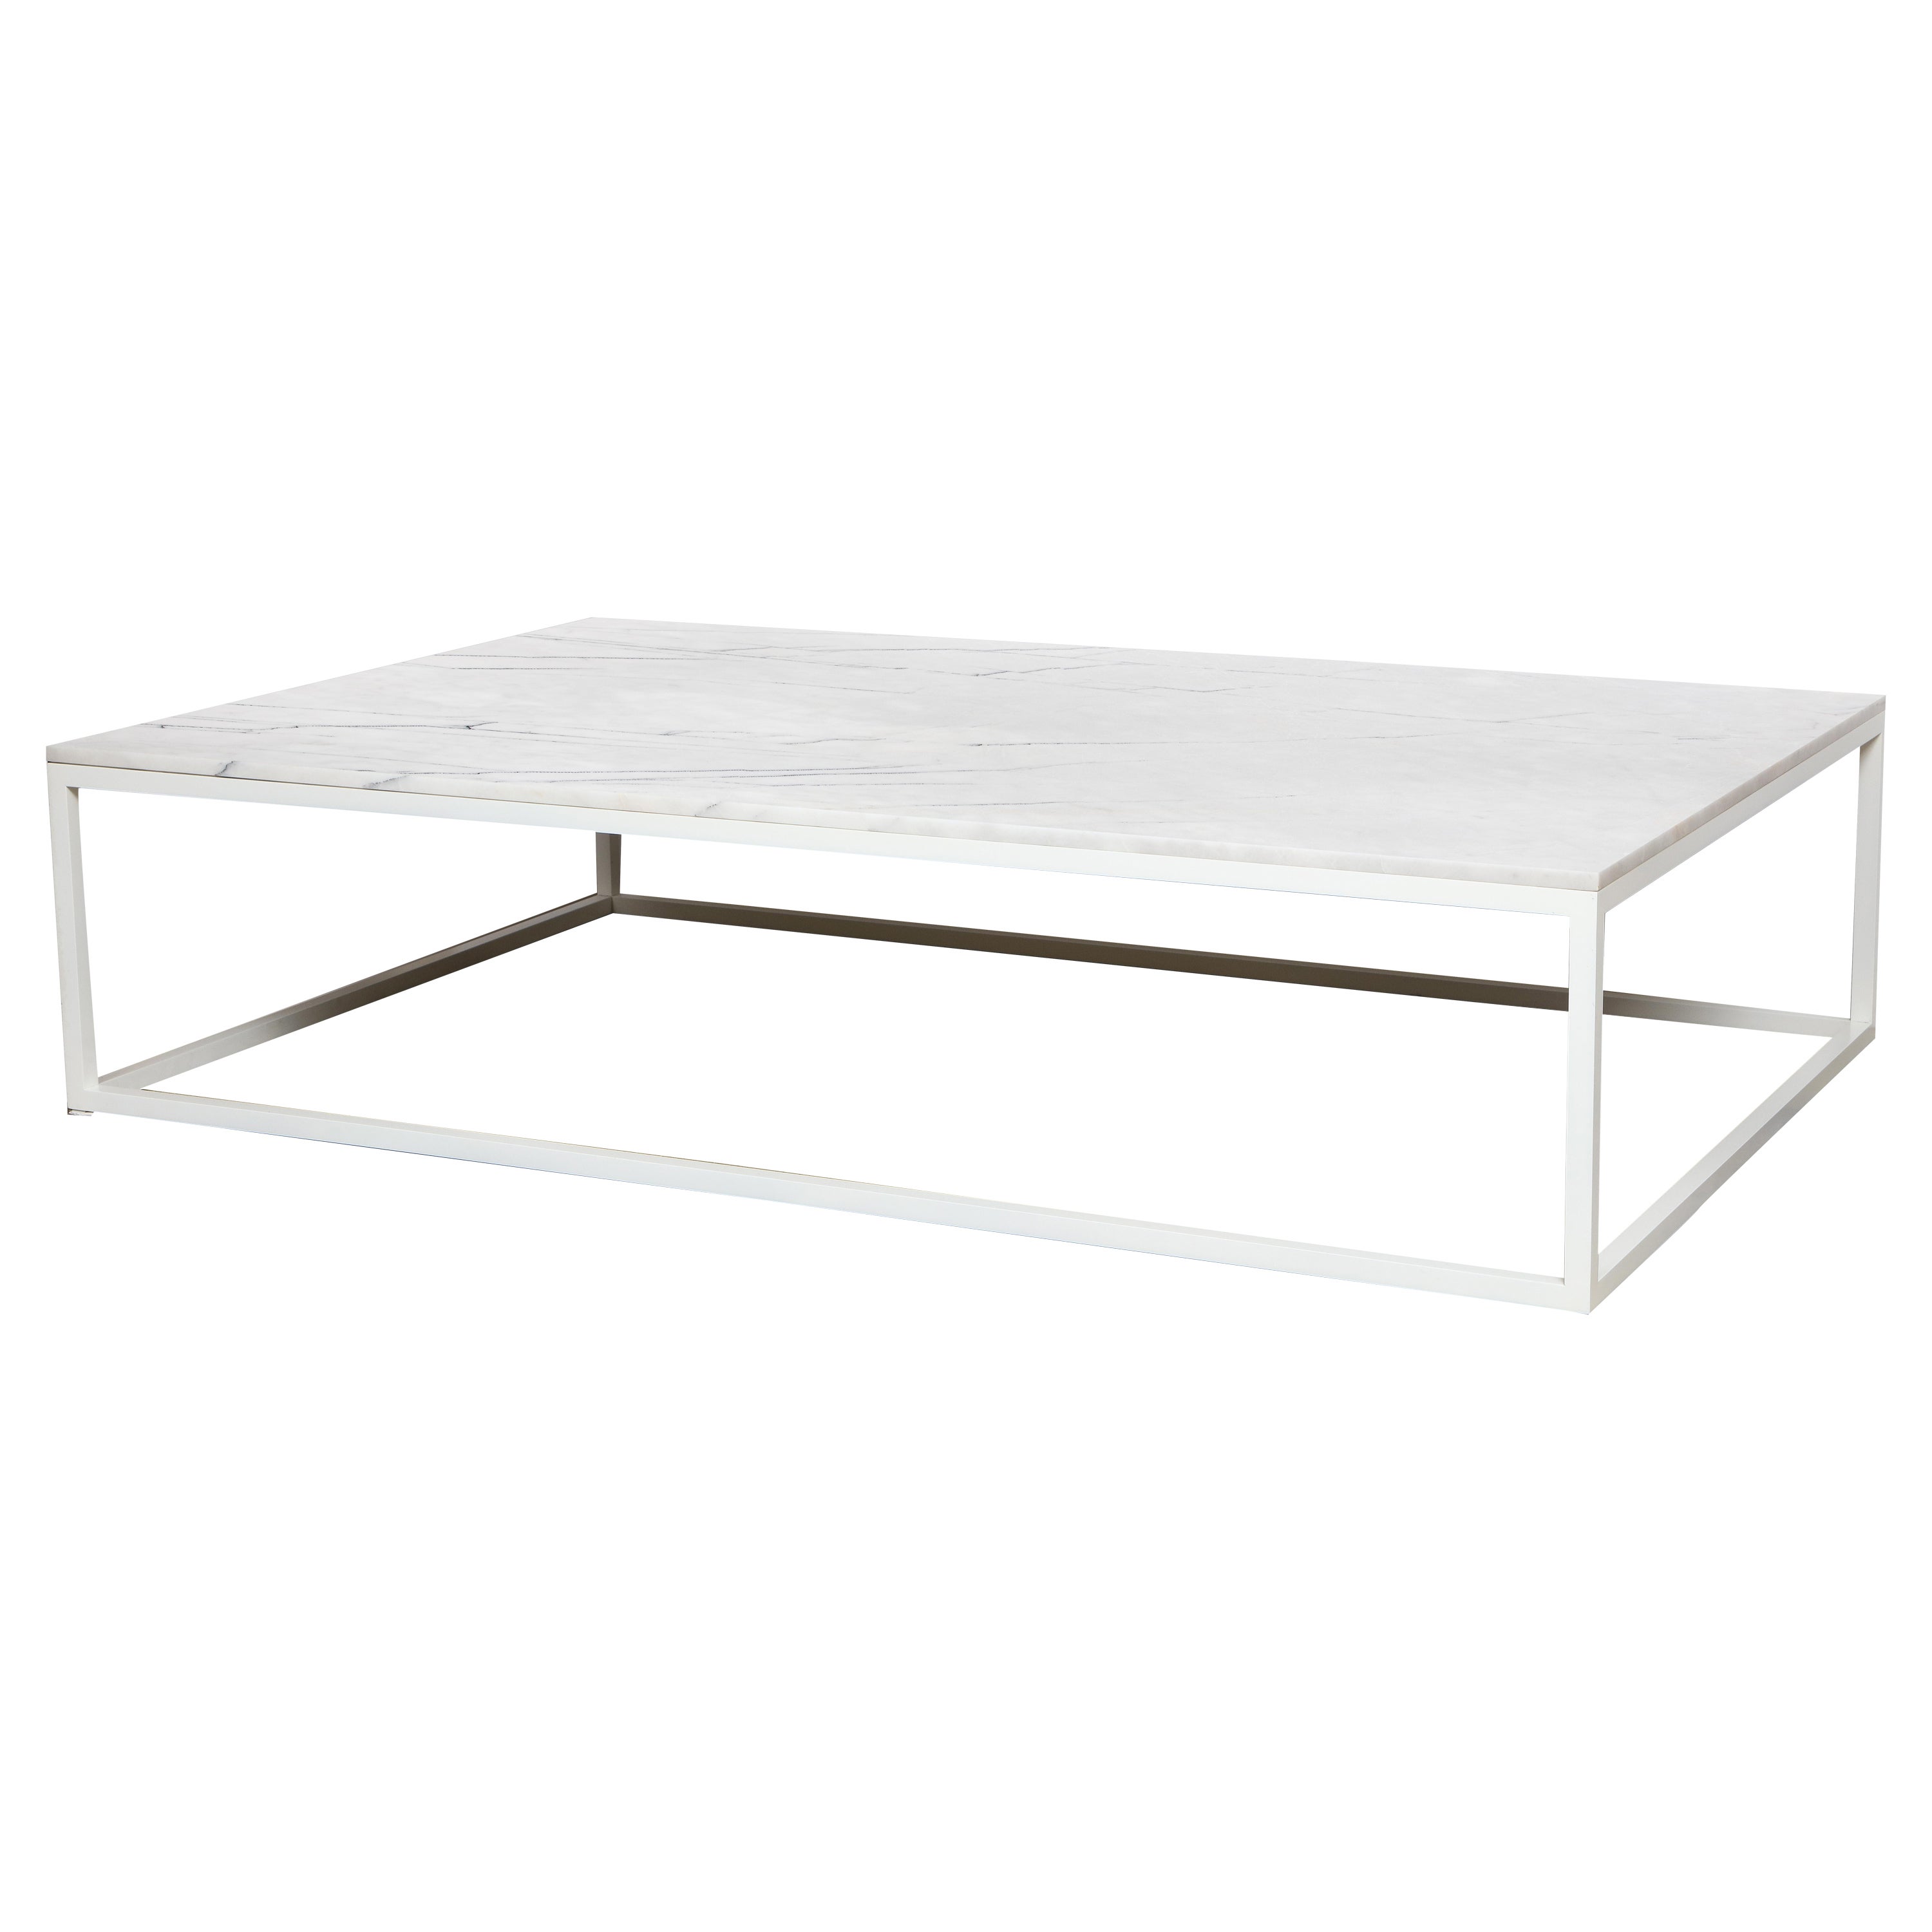 Custom Made to Order Coffee Table Metal White Base & Marble Top - In stock For Sale